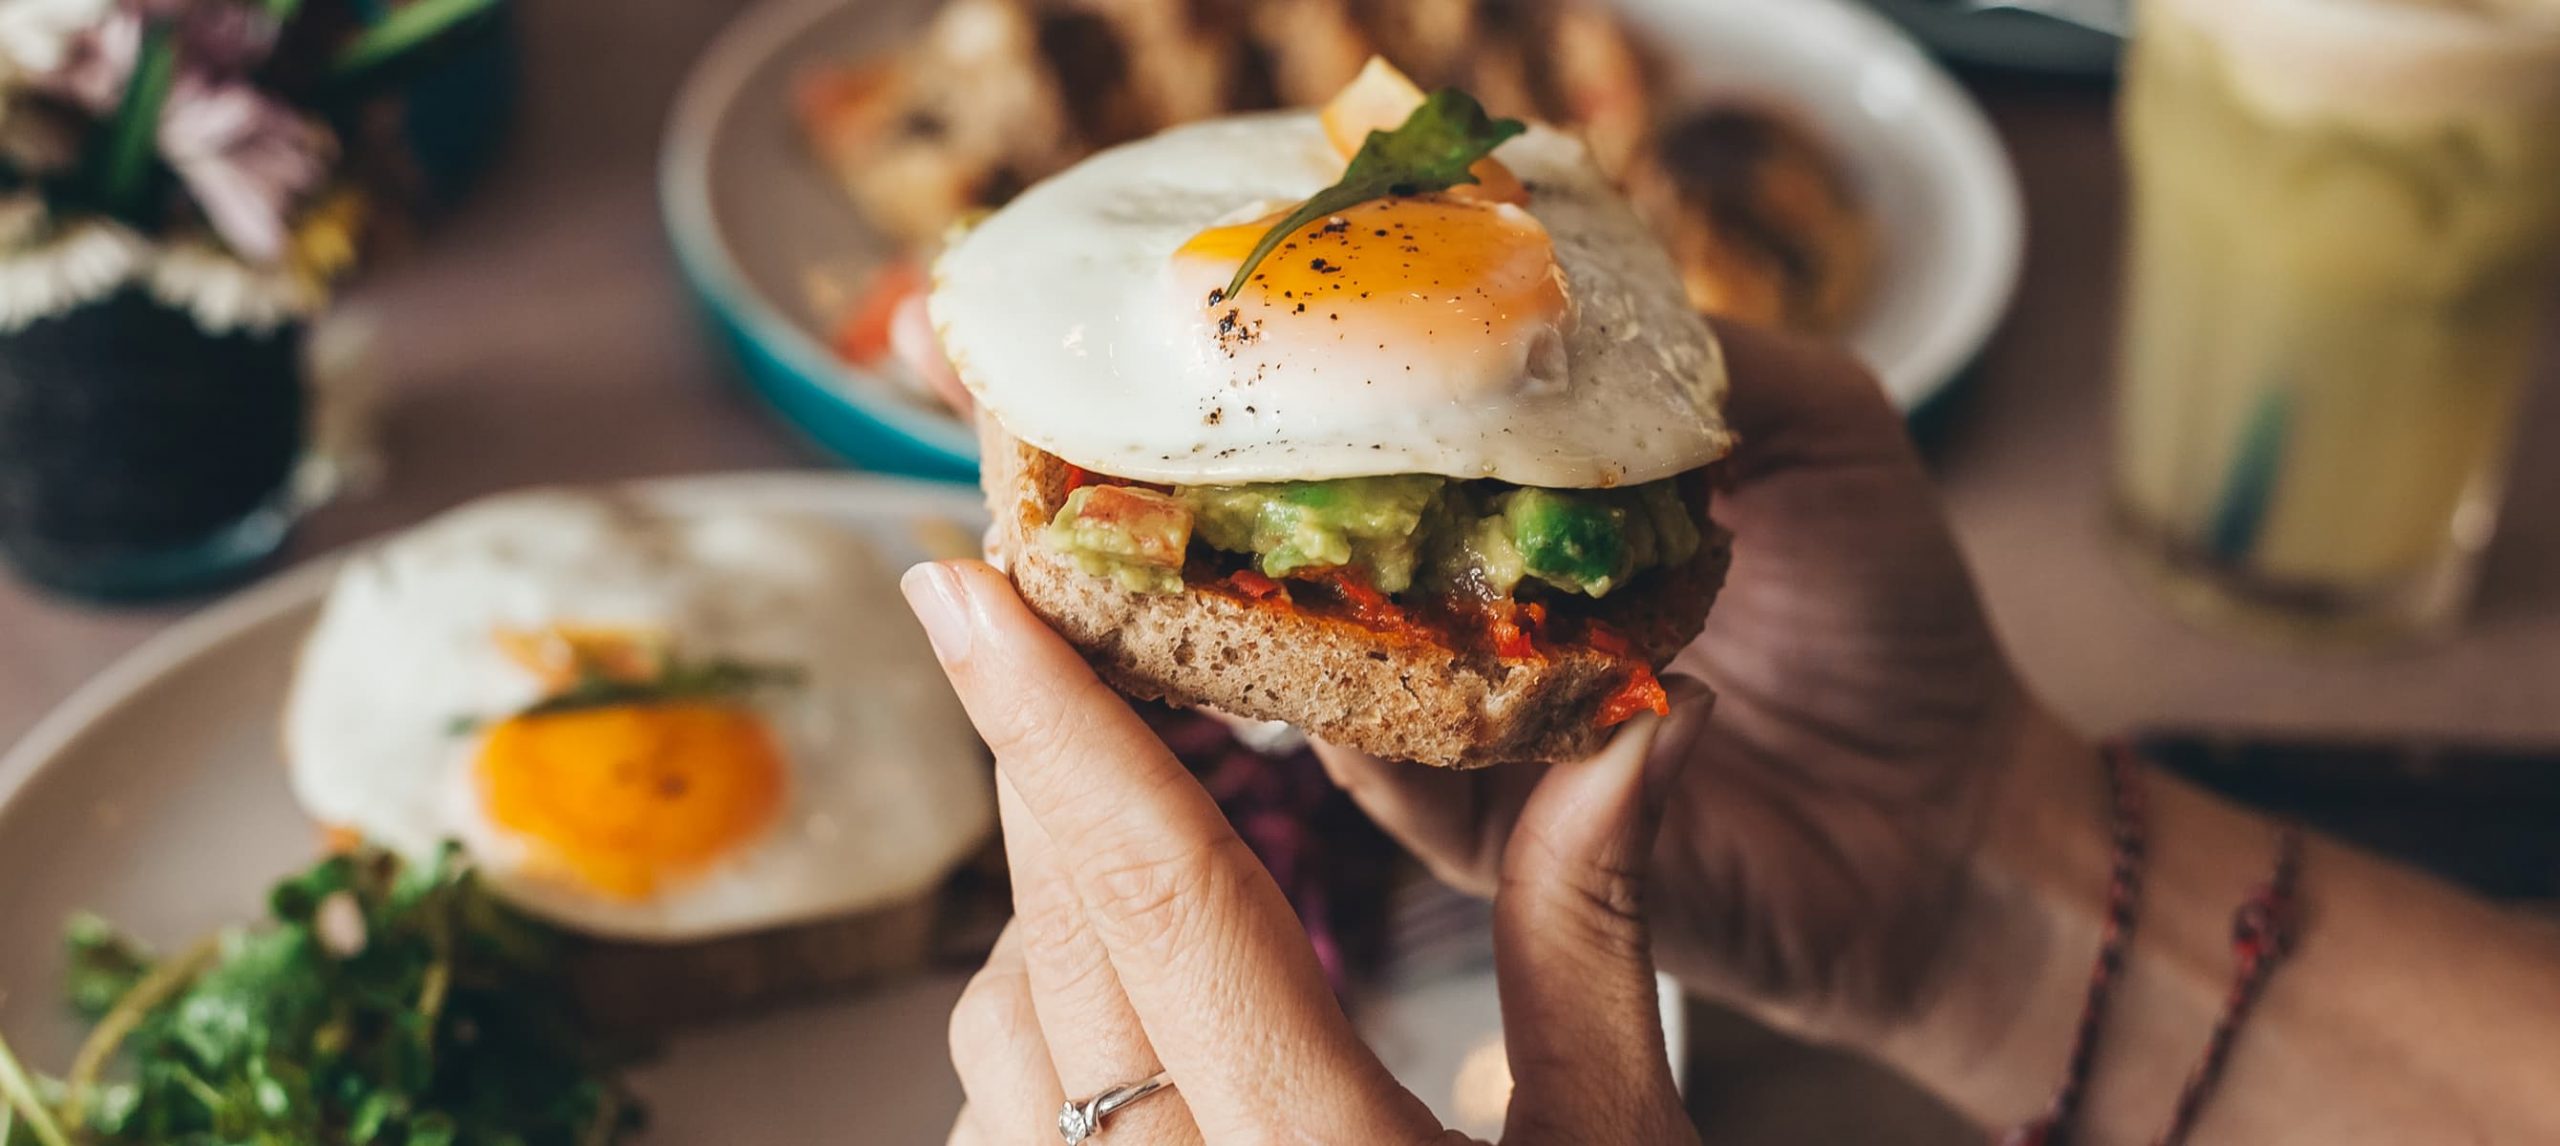 Female hands holding avocado toast with egg during brunch.